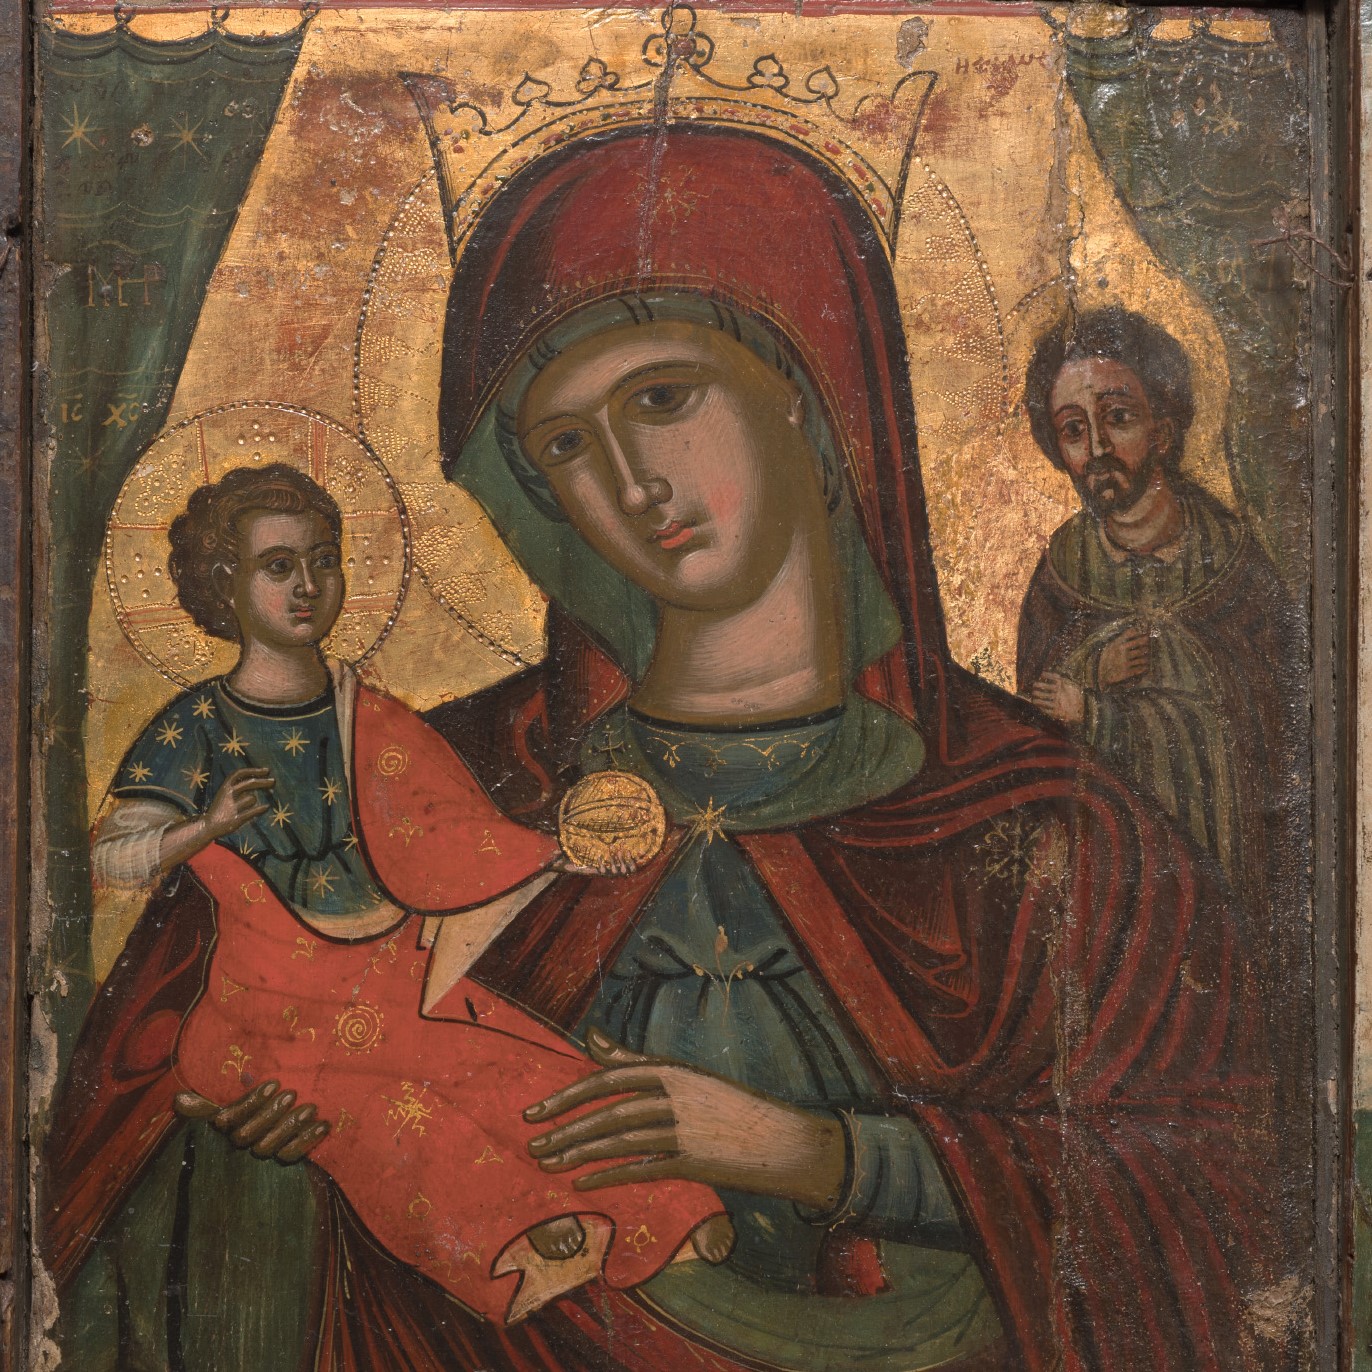 Curator tours of Heavenly Beings: Icons of the Christian Orthodox World 